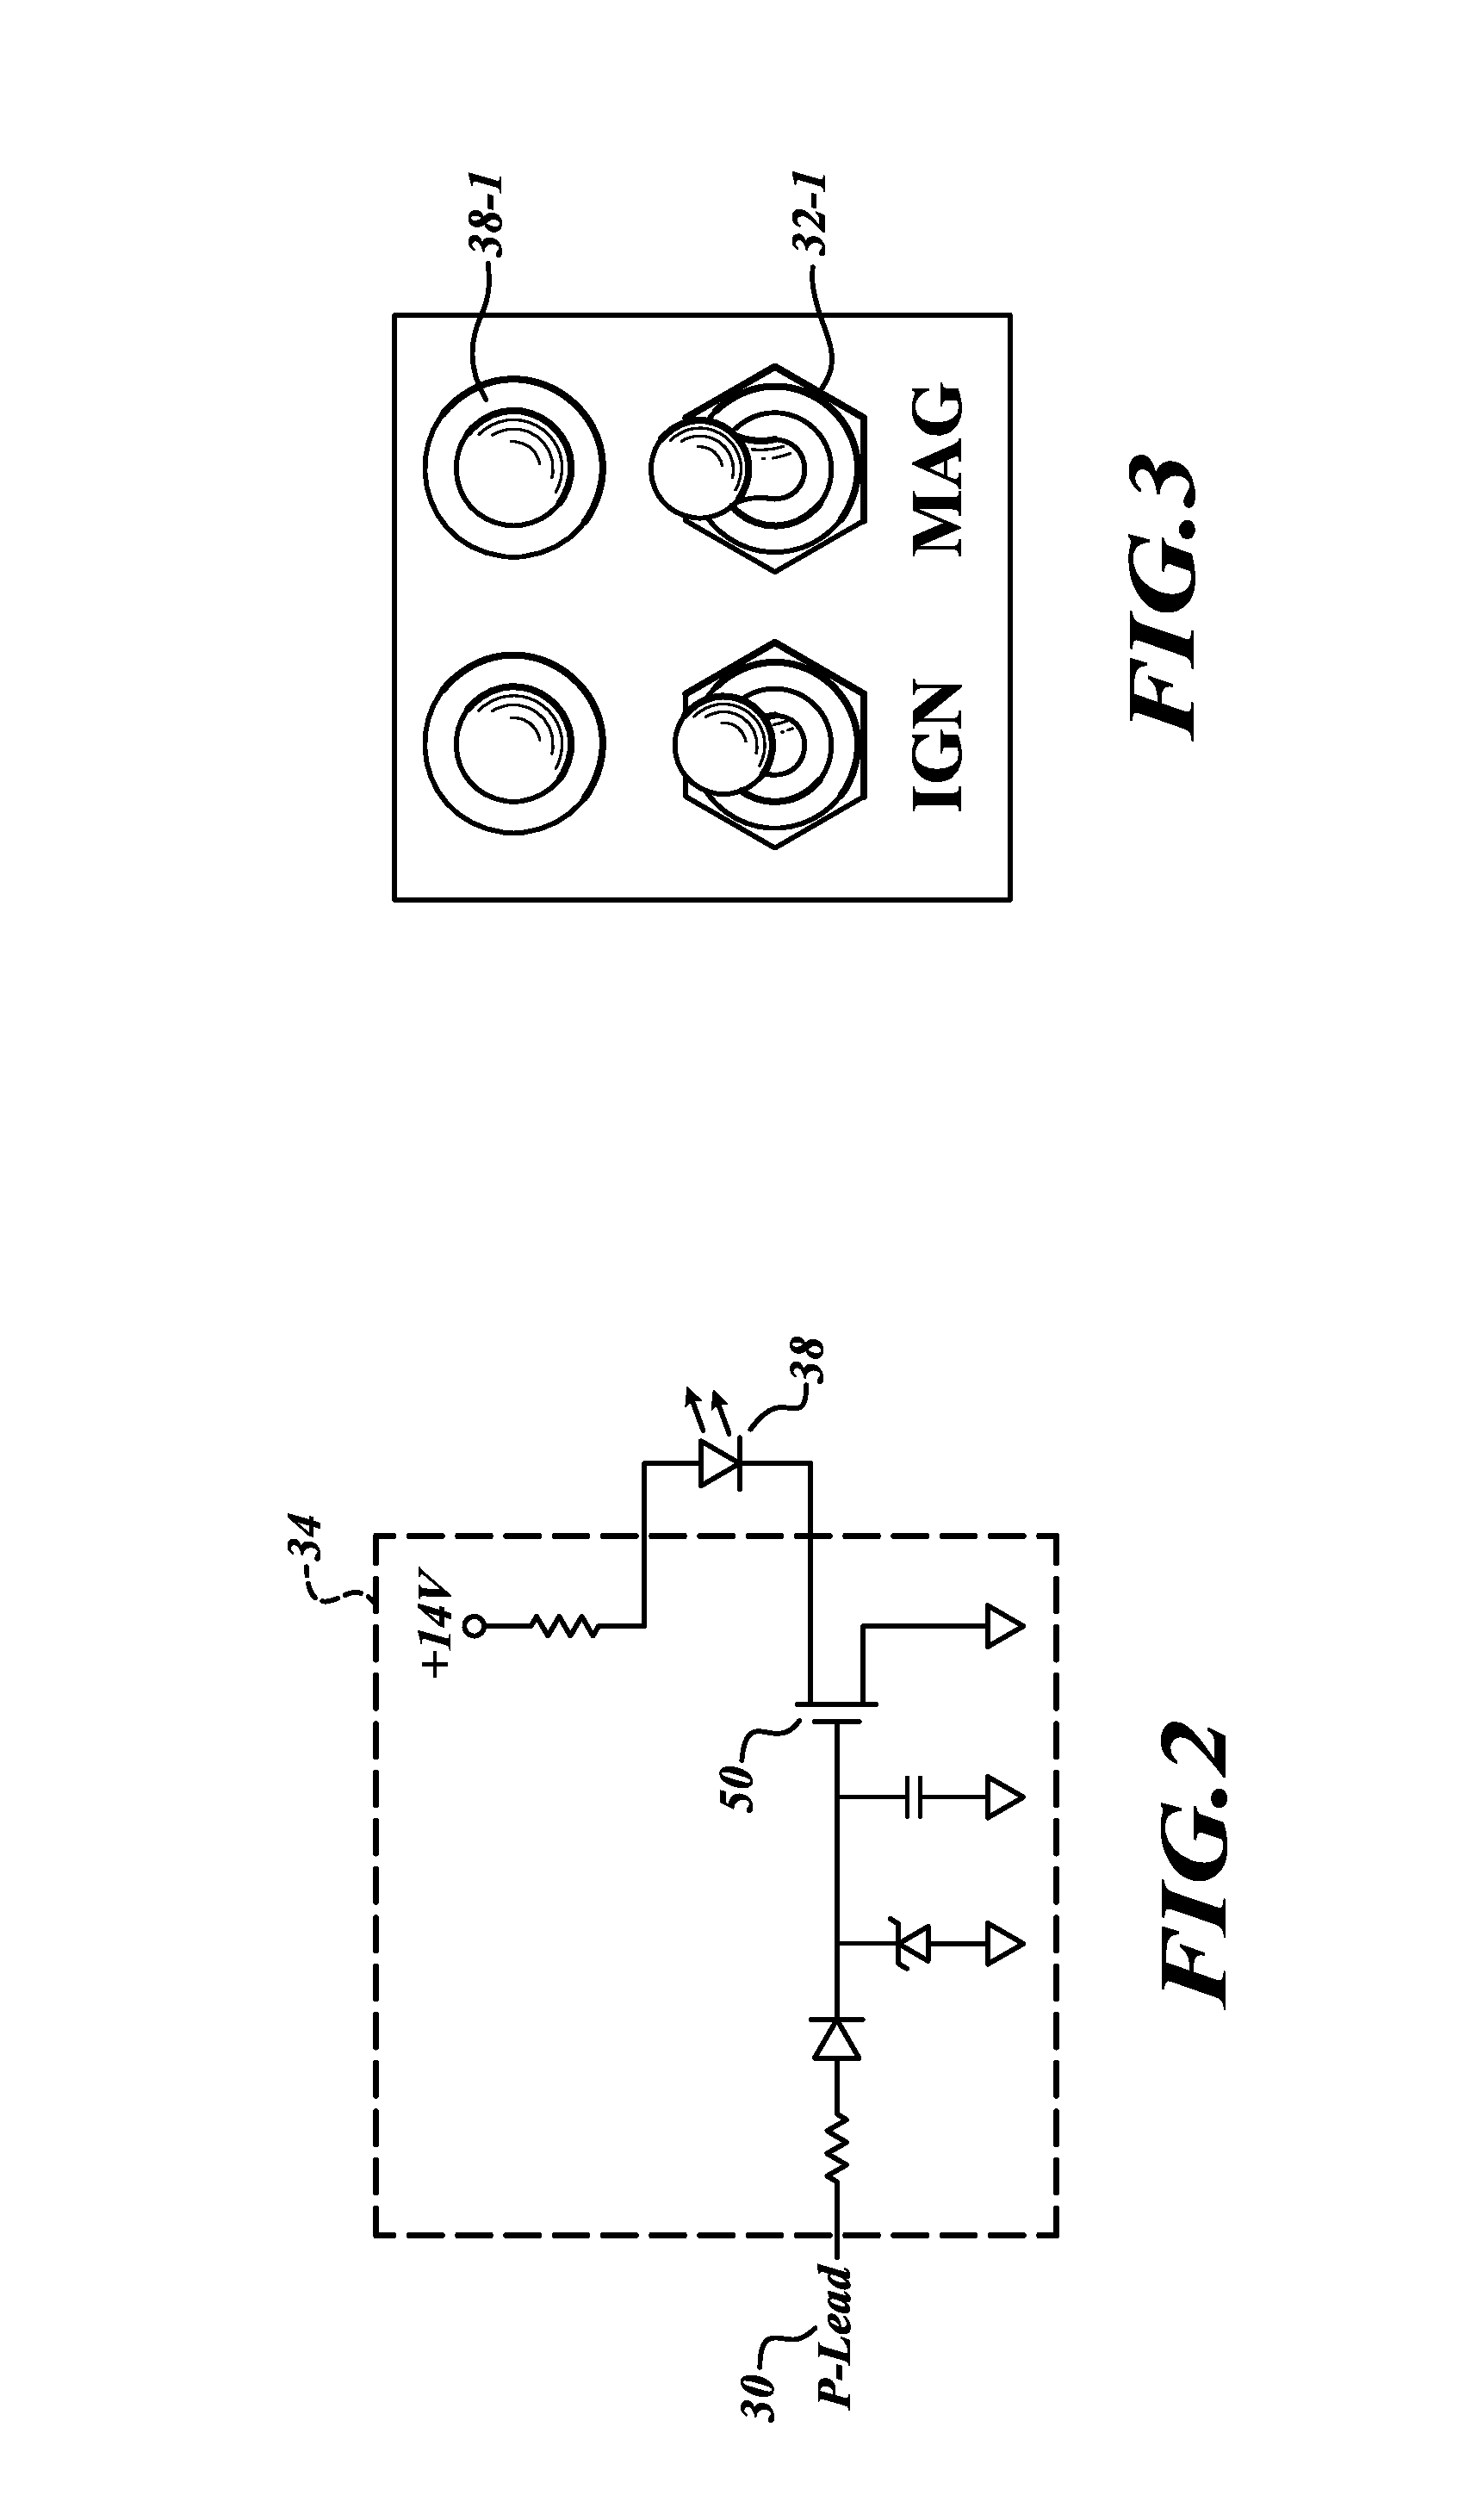 Magneto sensor for an aircraft ignition system